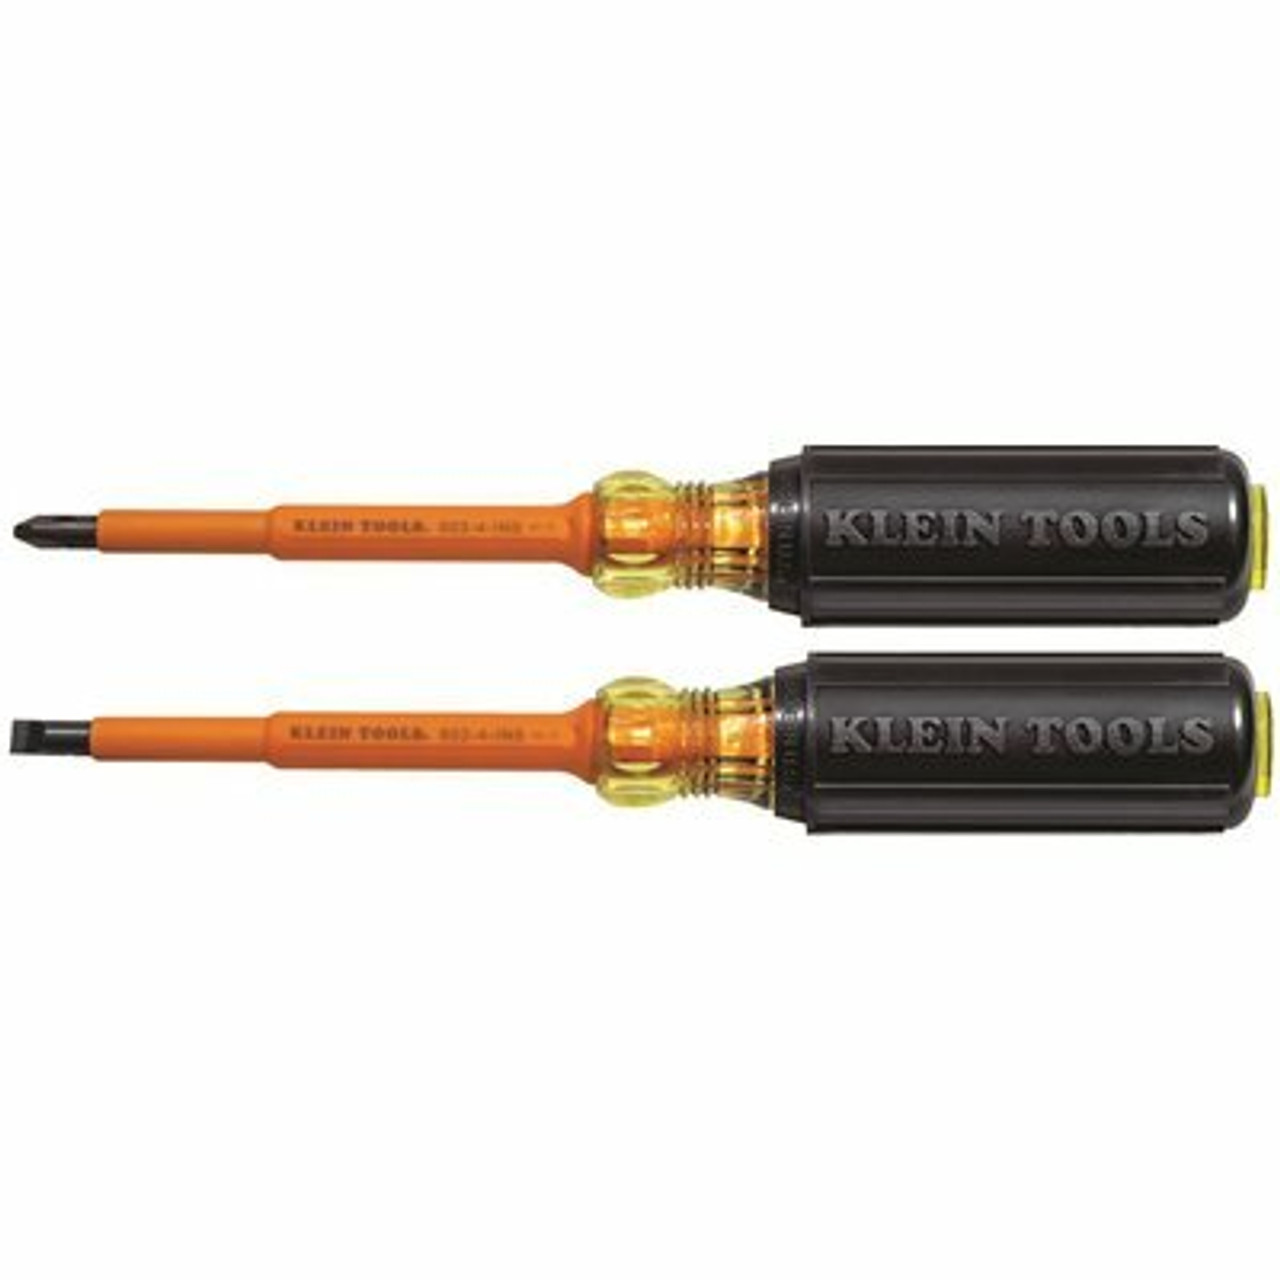 Klein Tools Screwdriver Set, 1000V Insulated Slotted And Phillips, 2-Piece